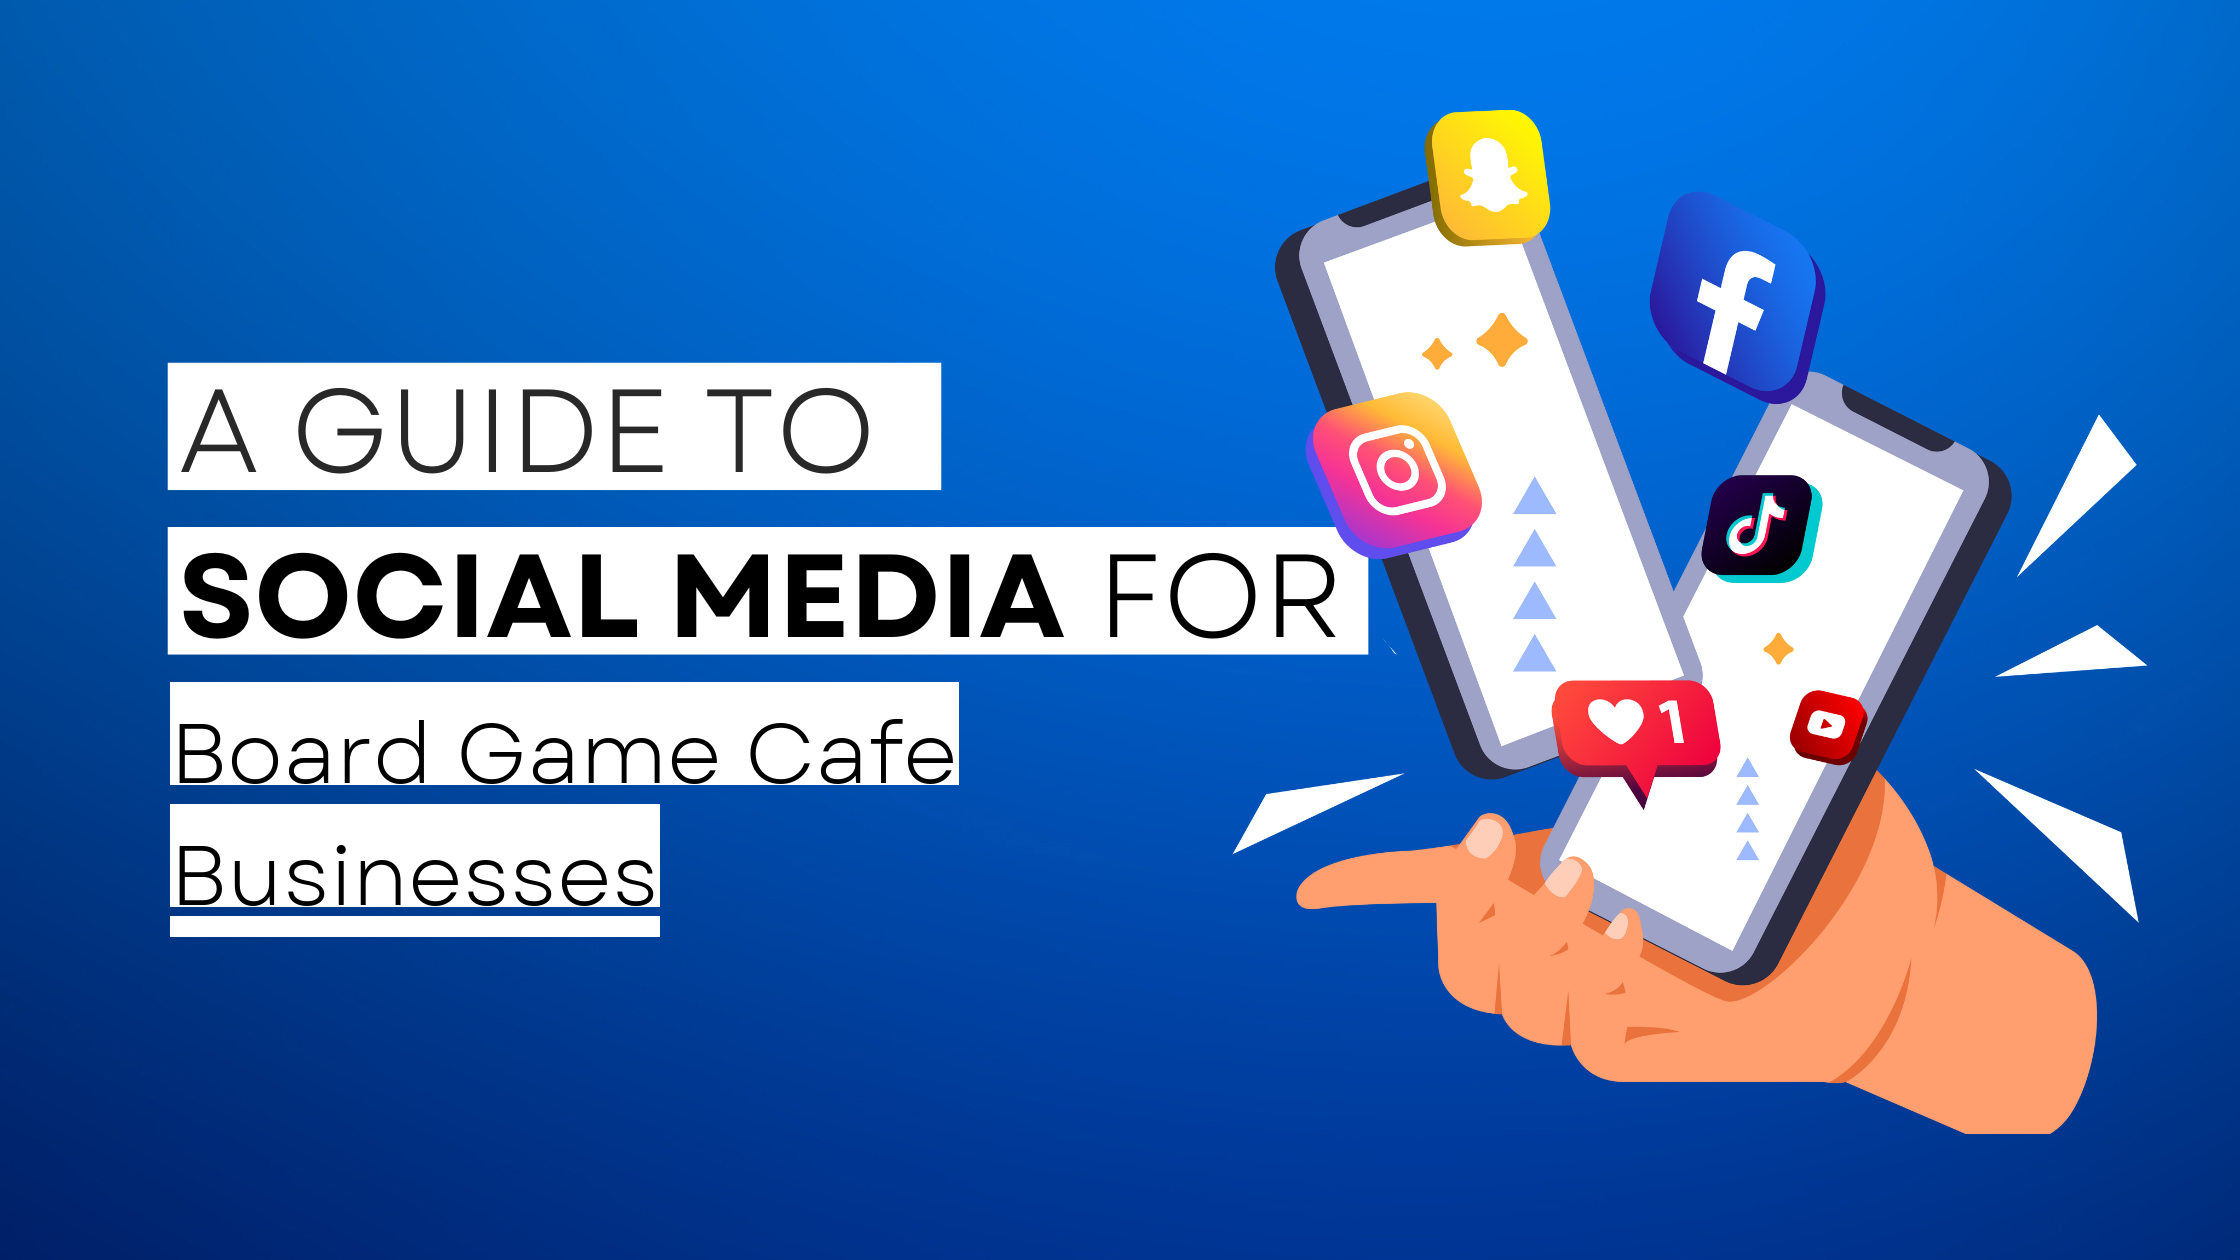 How to start Board Game Cafe  on social media